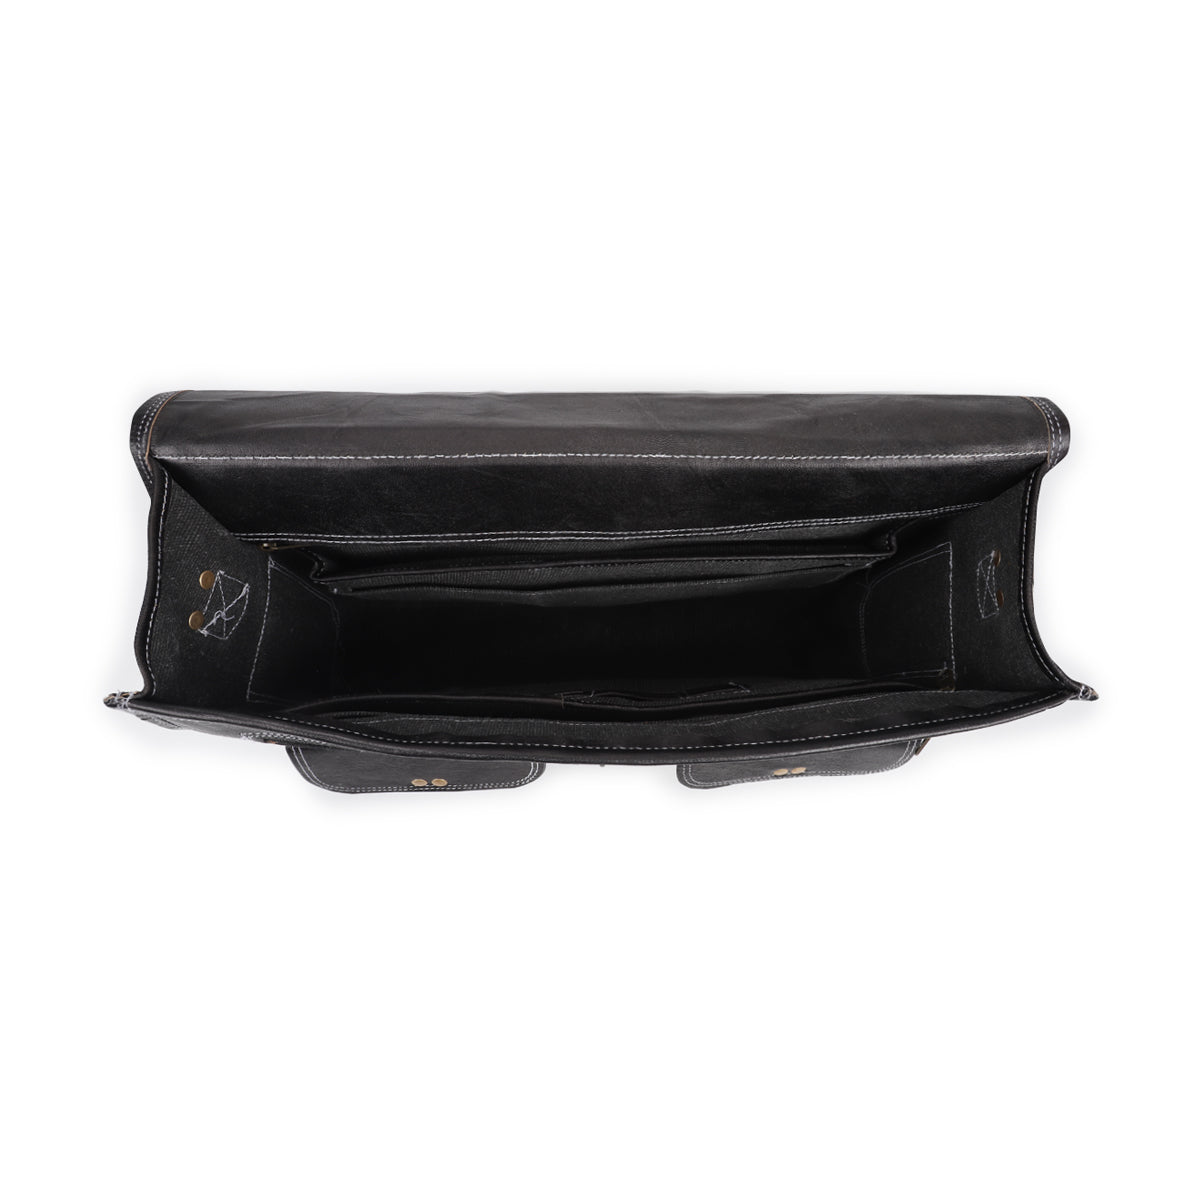 black leather briefcase inside view